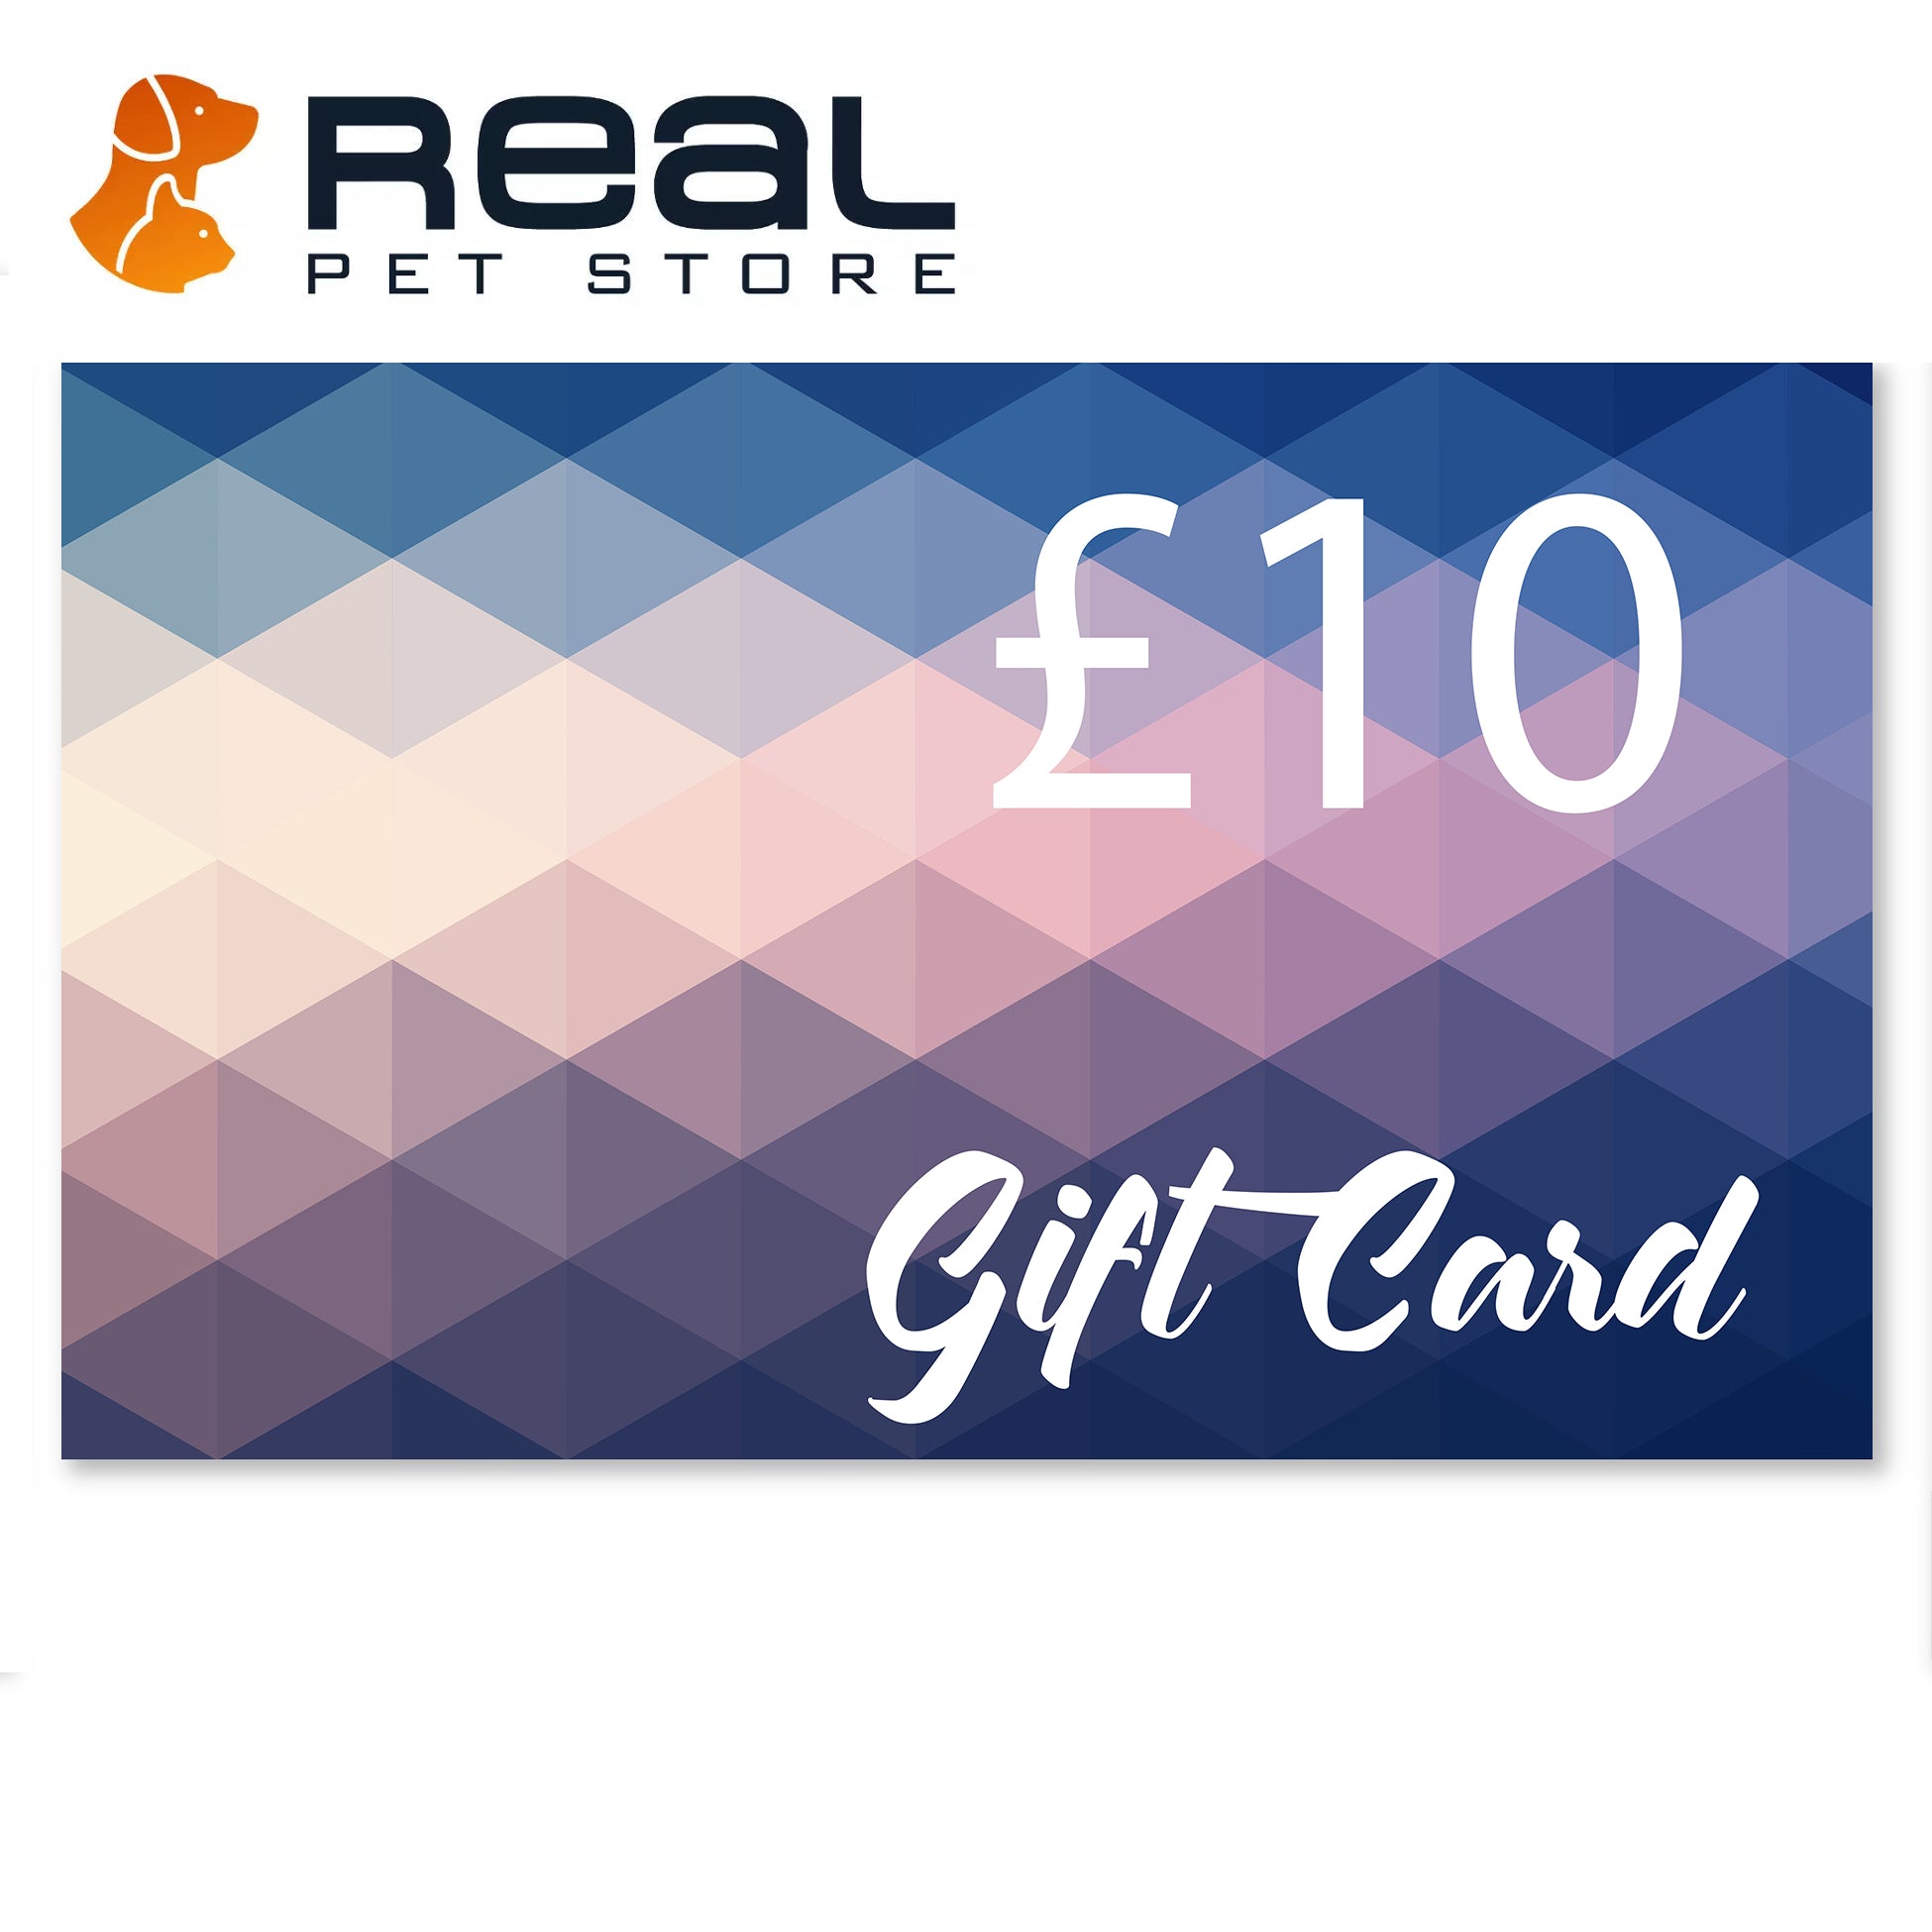 Real Pet Store Gift Card £10 - Real Pets